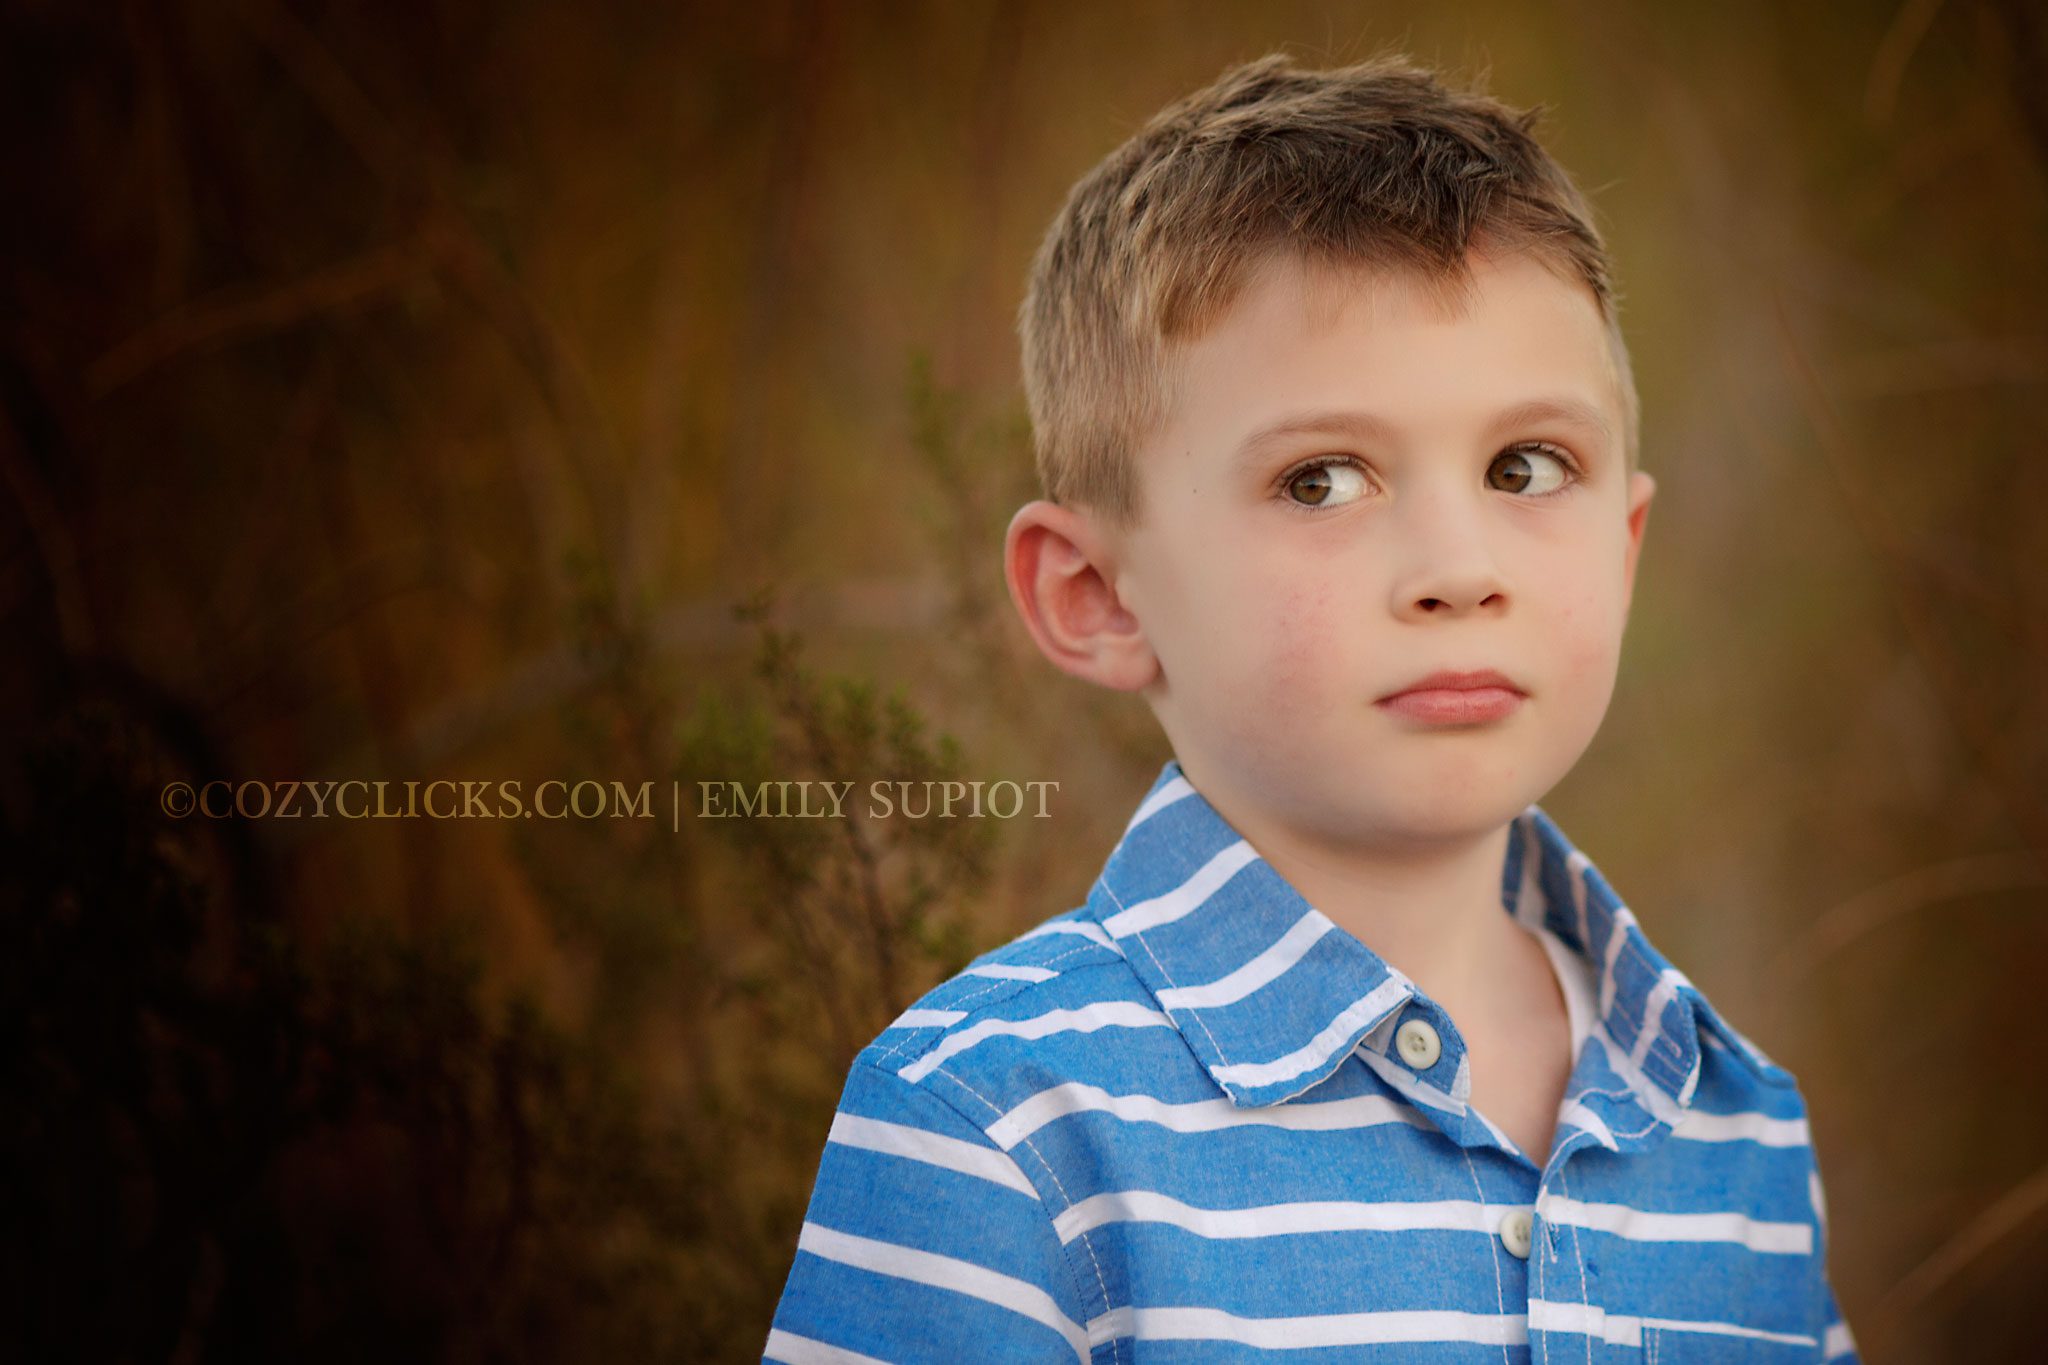 Child Photography in Ahwatukee, Arizona  Birthday pictures at Telegraph Pass